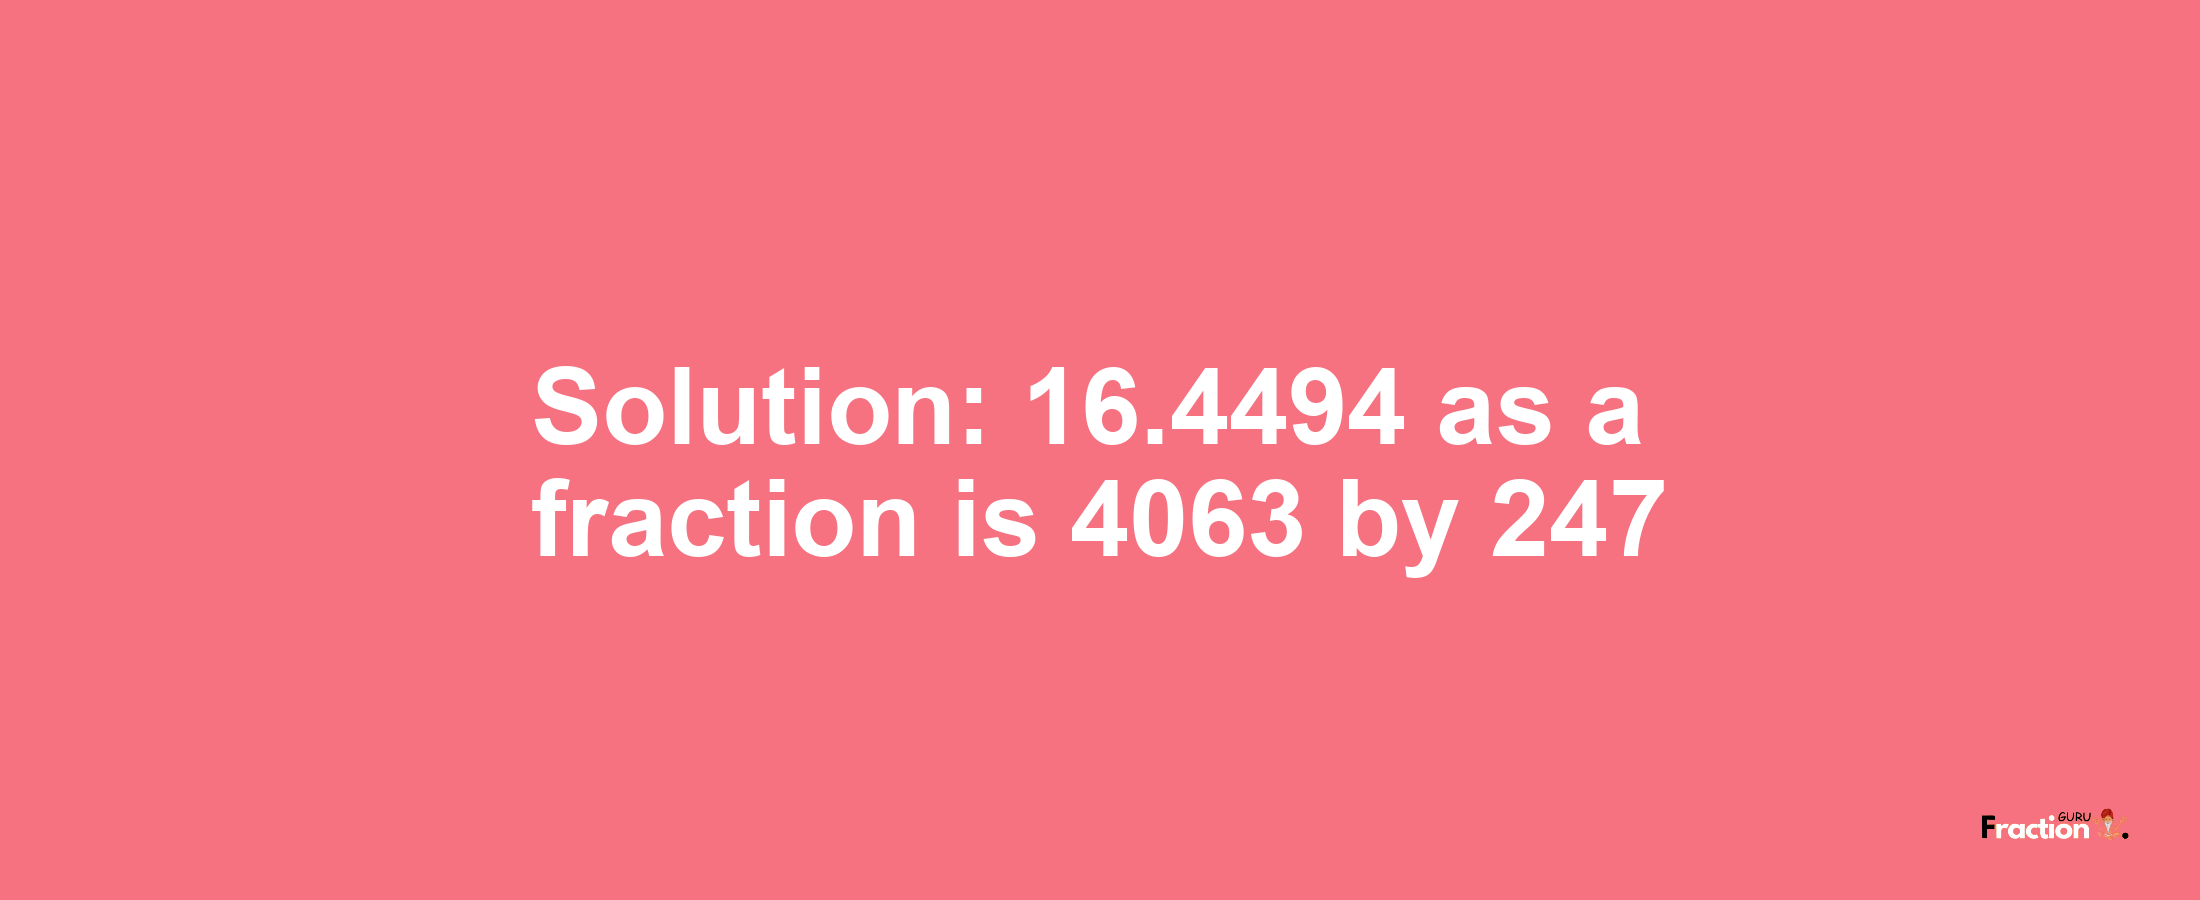 Solution:16.4494 as a fraction is 4063/247